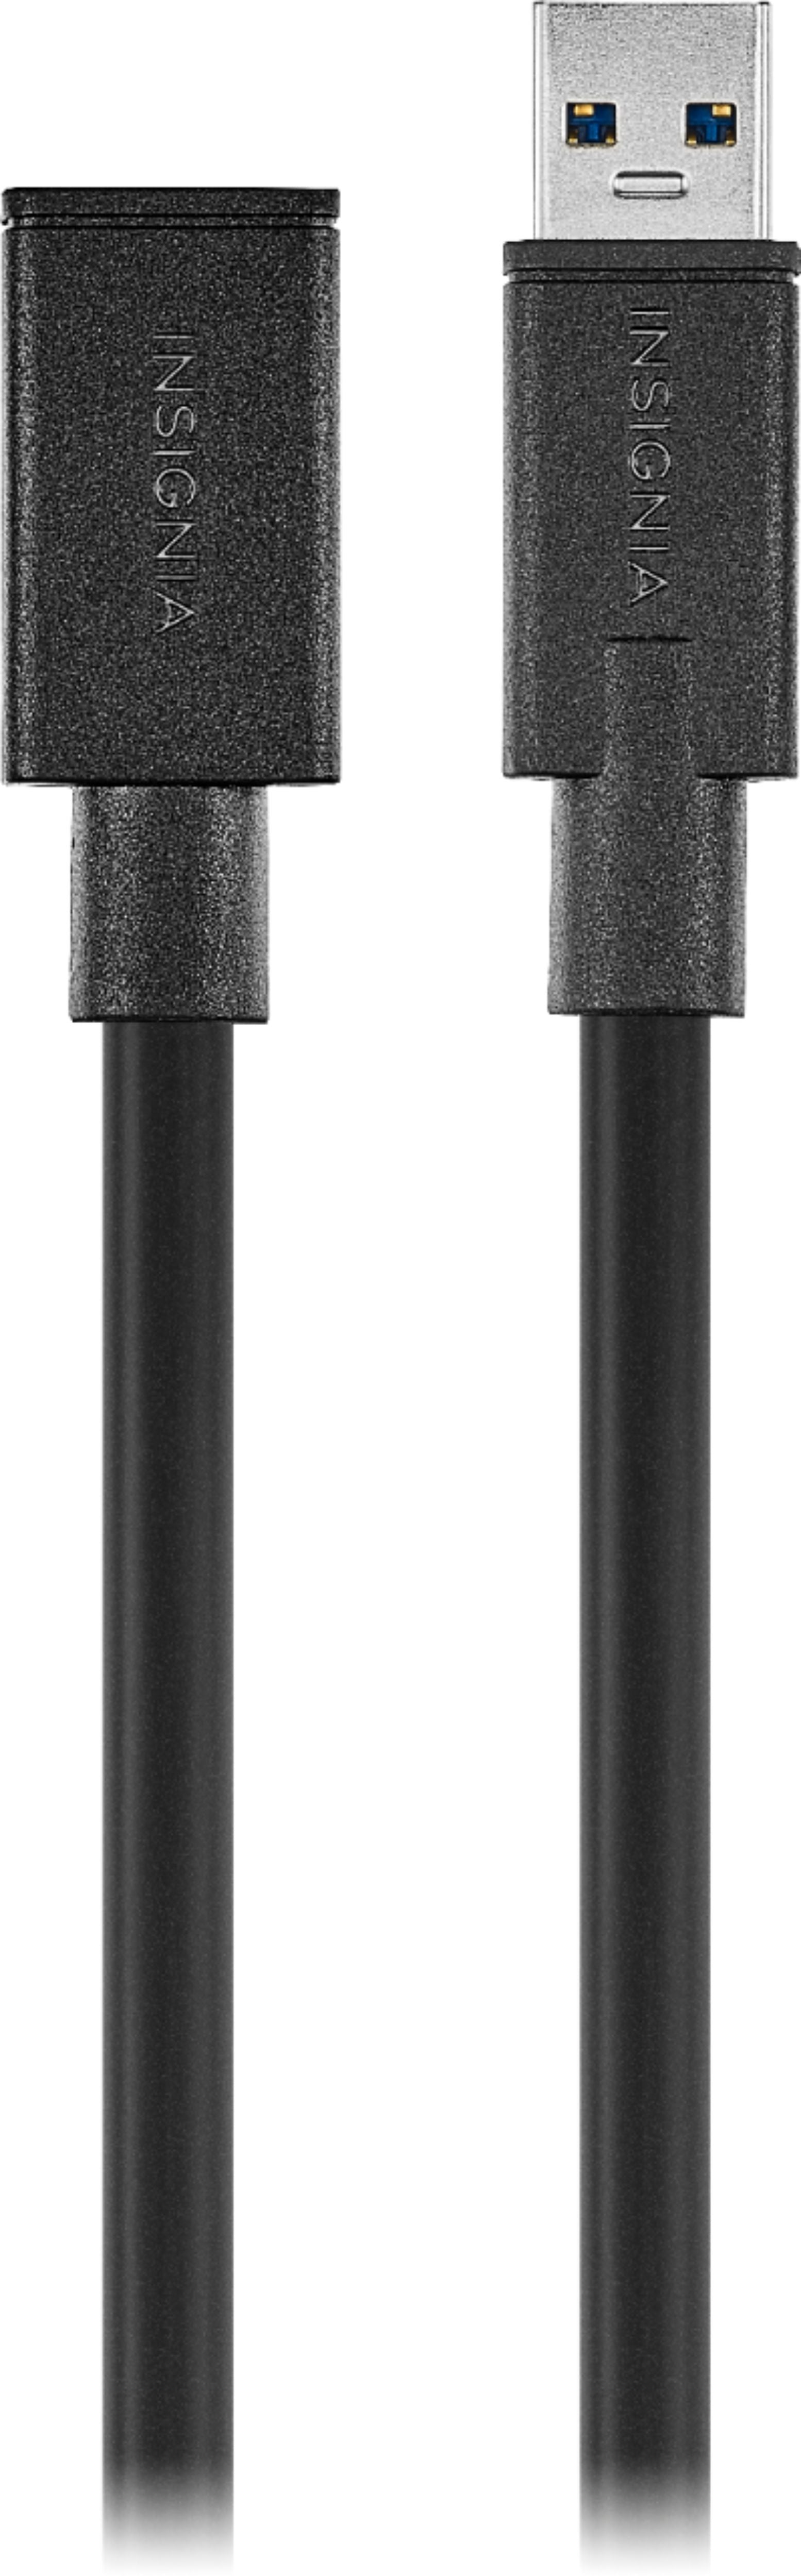 Insignia- 12' USB 3.0 Extension Cable - Rekes Sales